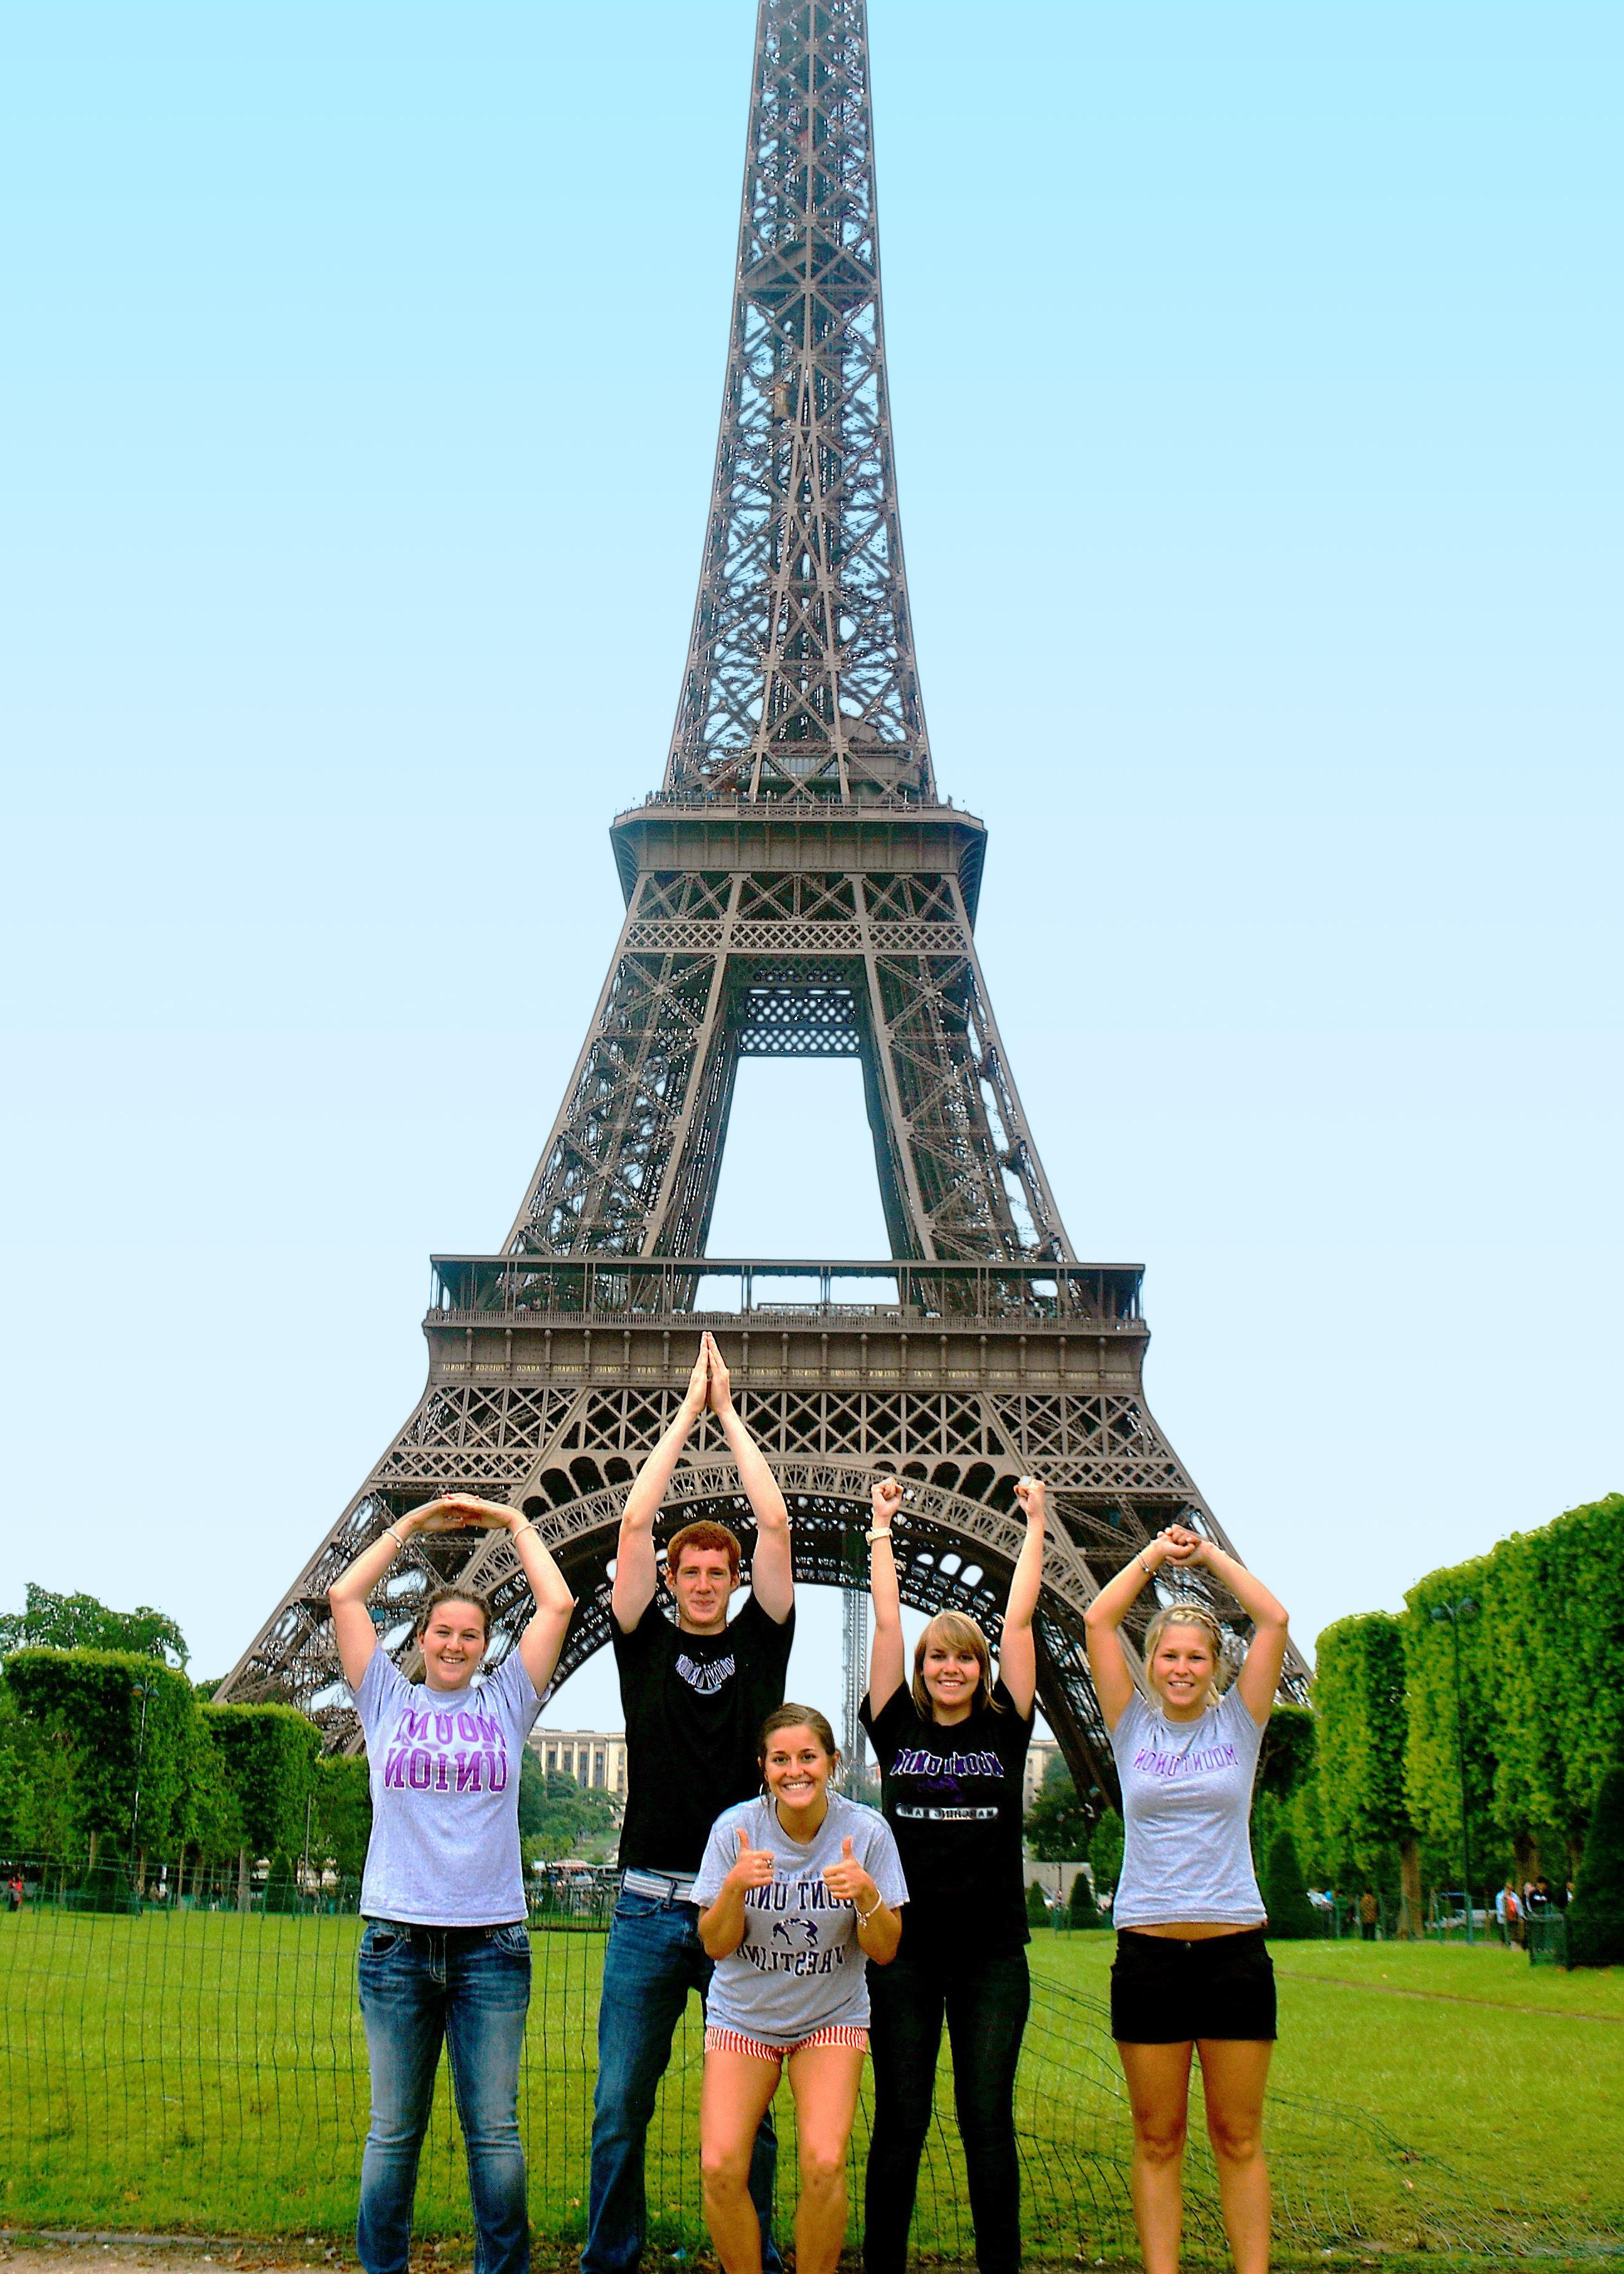 Students in front of Eiffel Tower